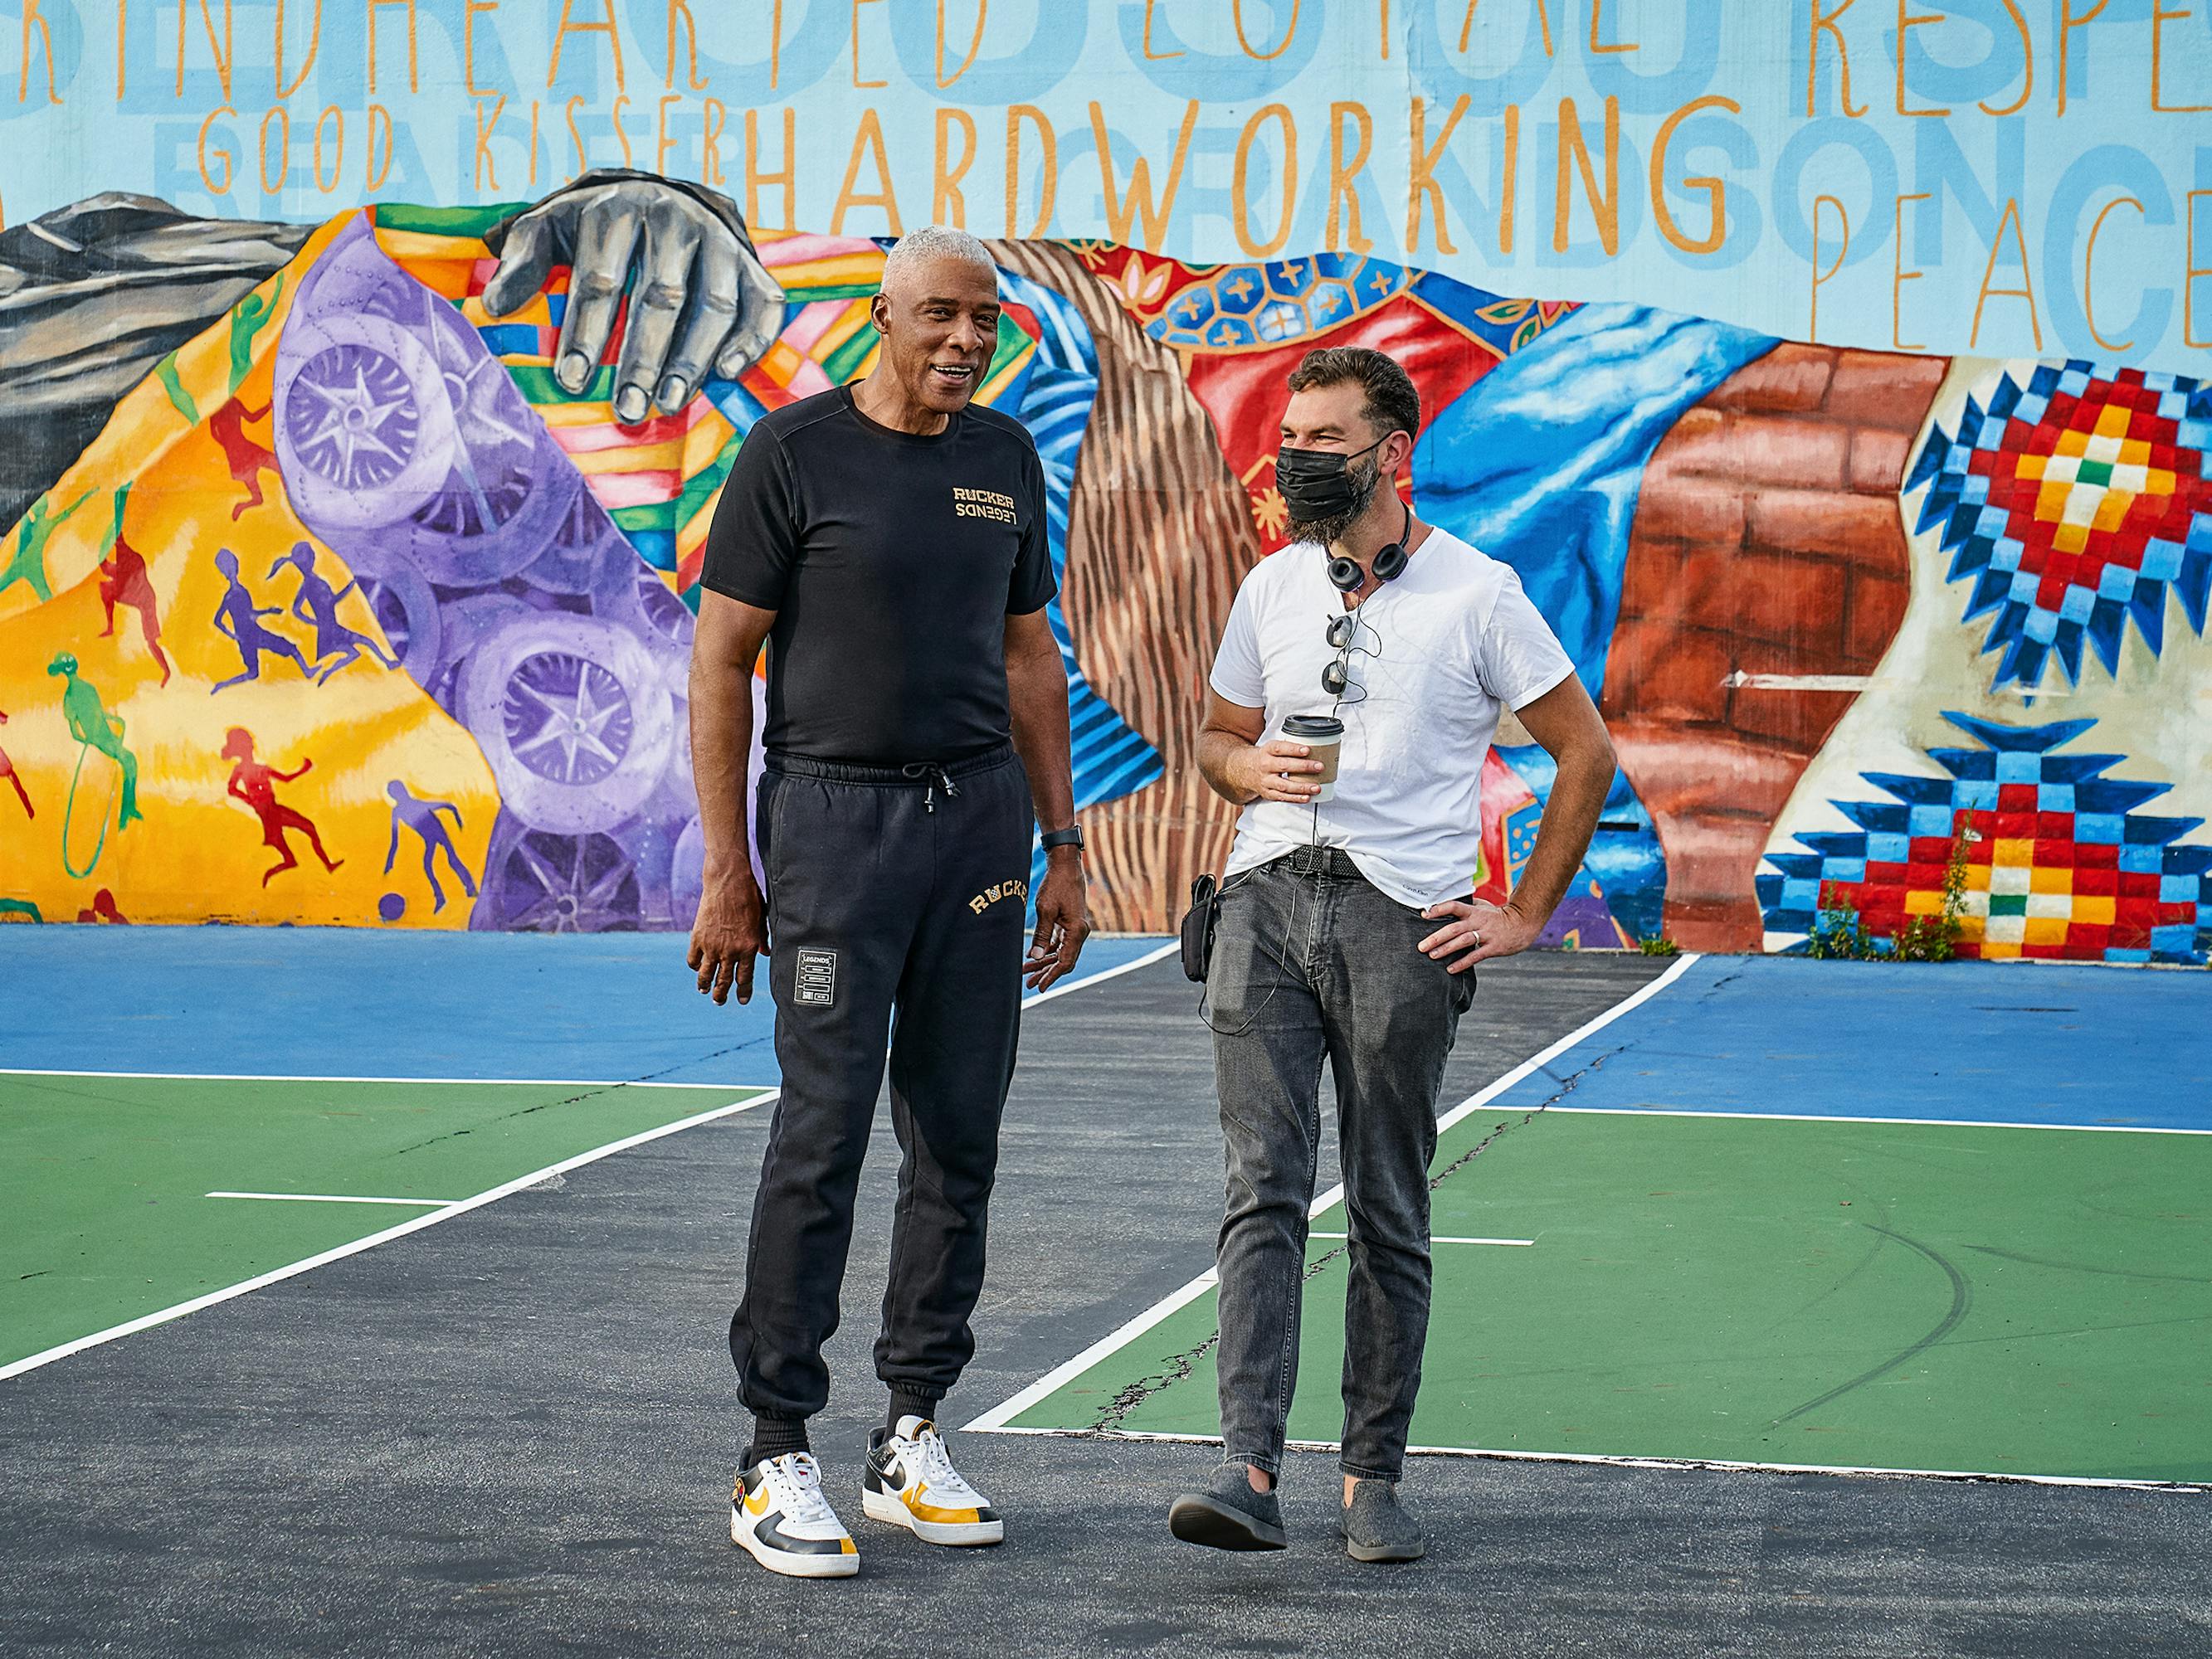 Dr. J and Jeremiah Zagar stand on a court decorated by a colorful mural.